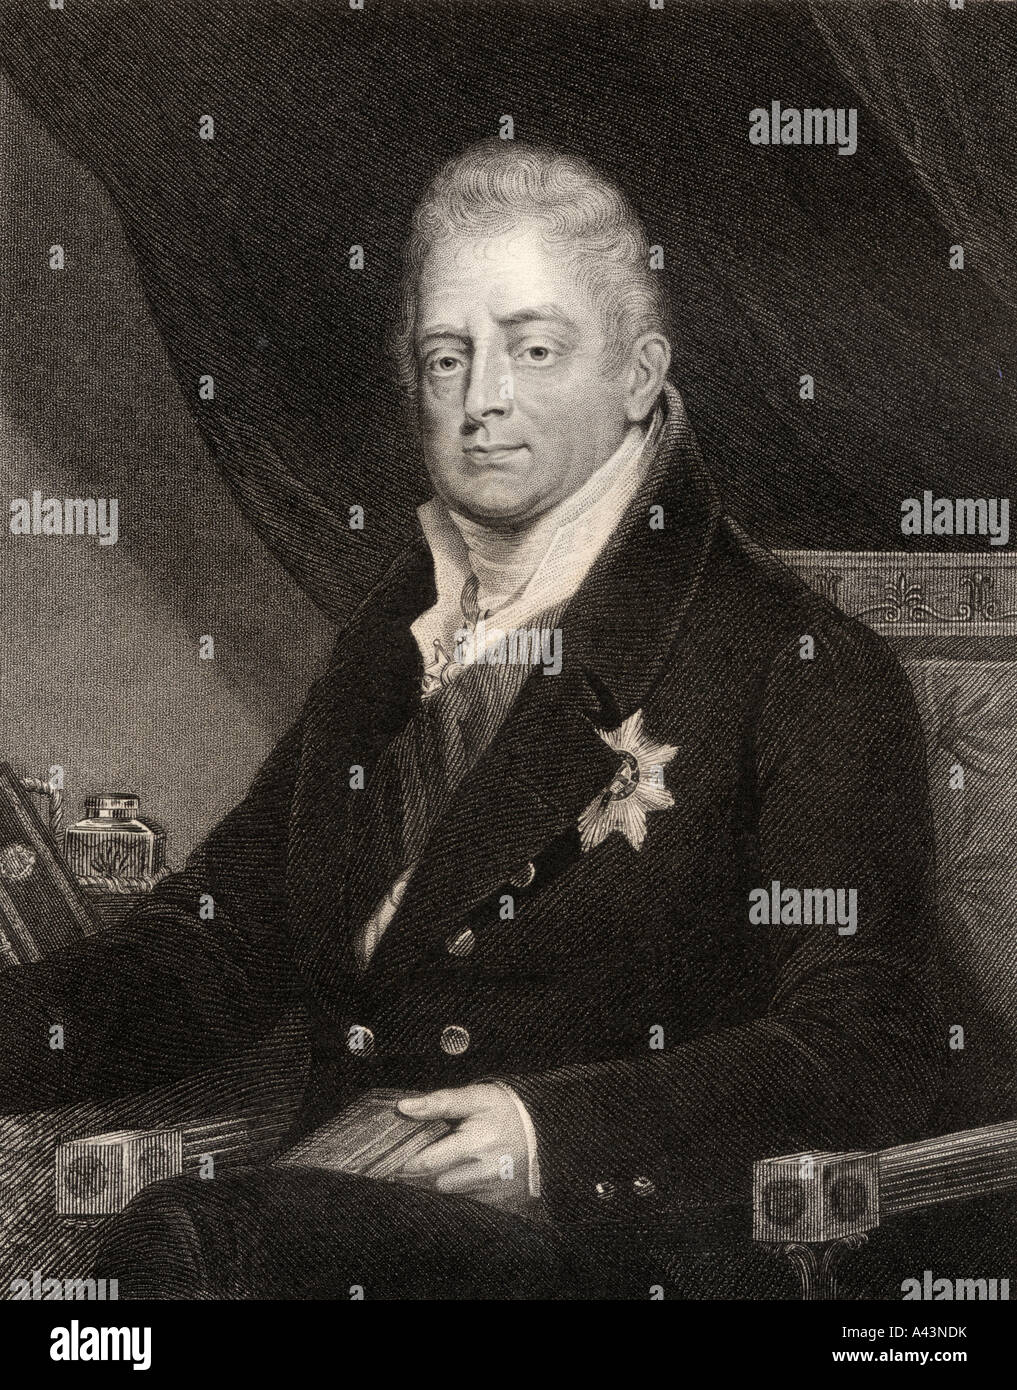 King William IV, 1765 - 1837. King of Great Britain and Ireland and King of Hanover, 1830 - 1837. Stock Photo